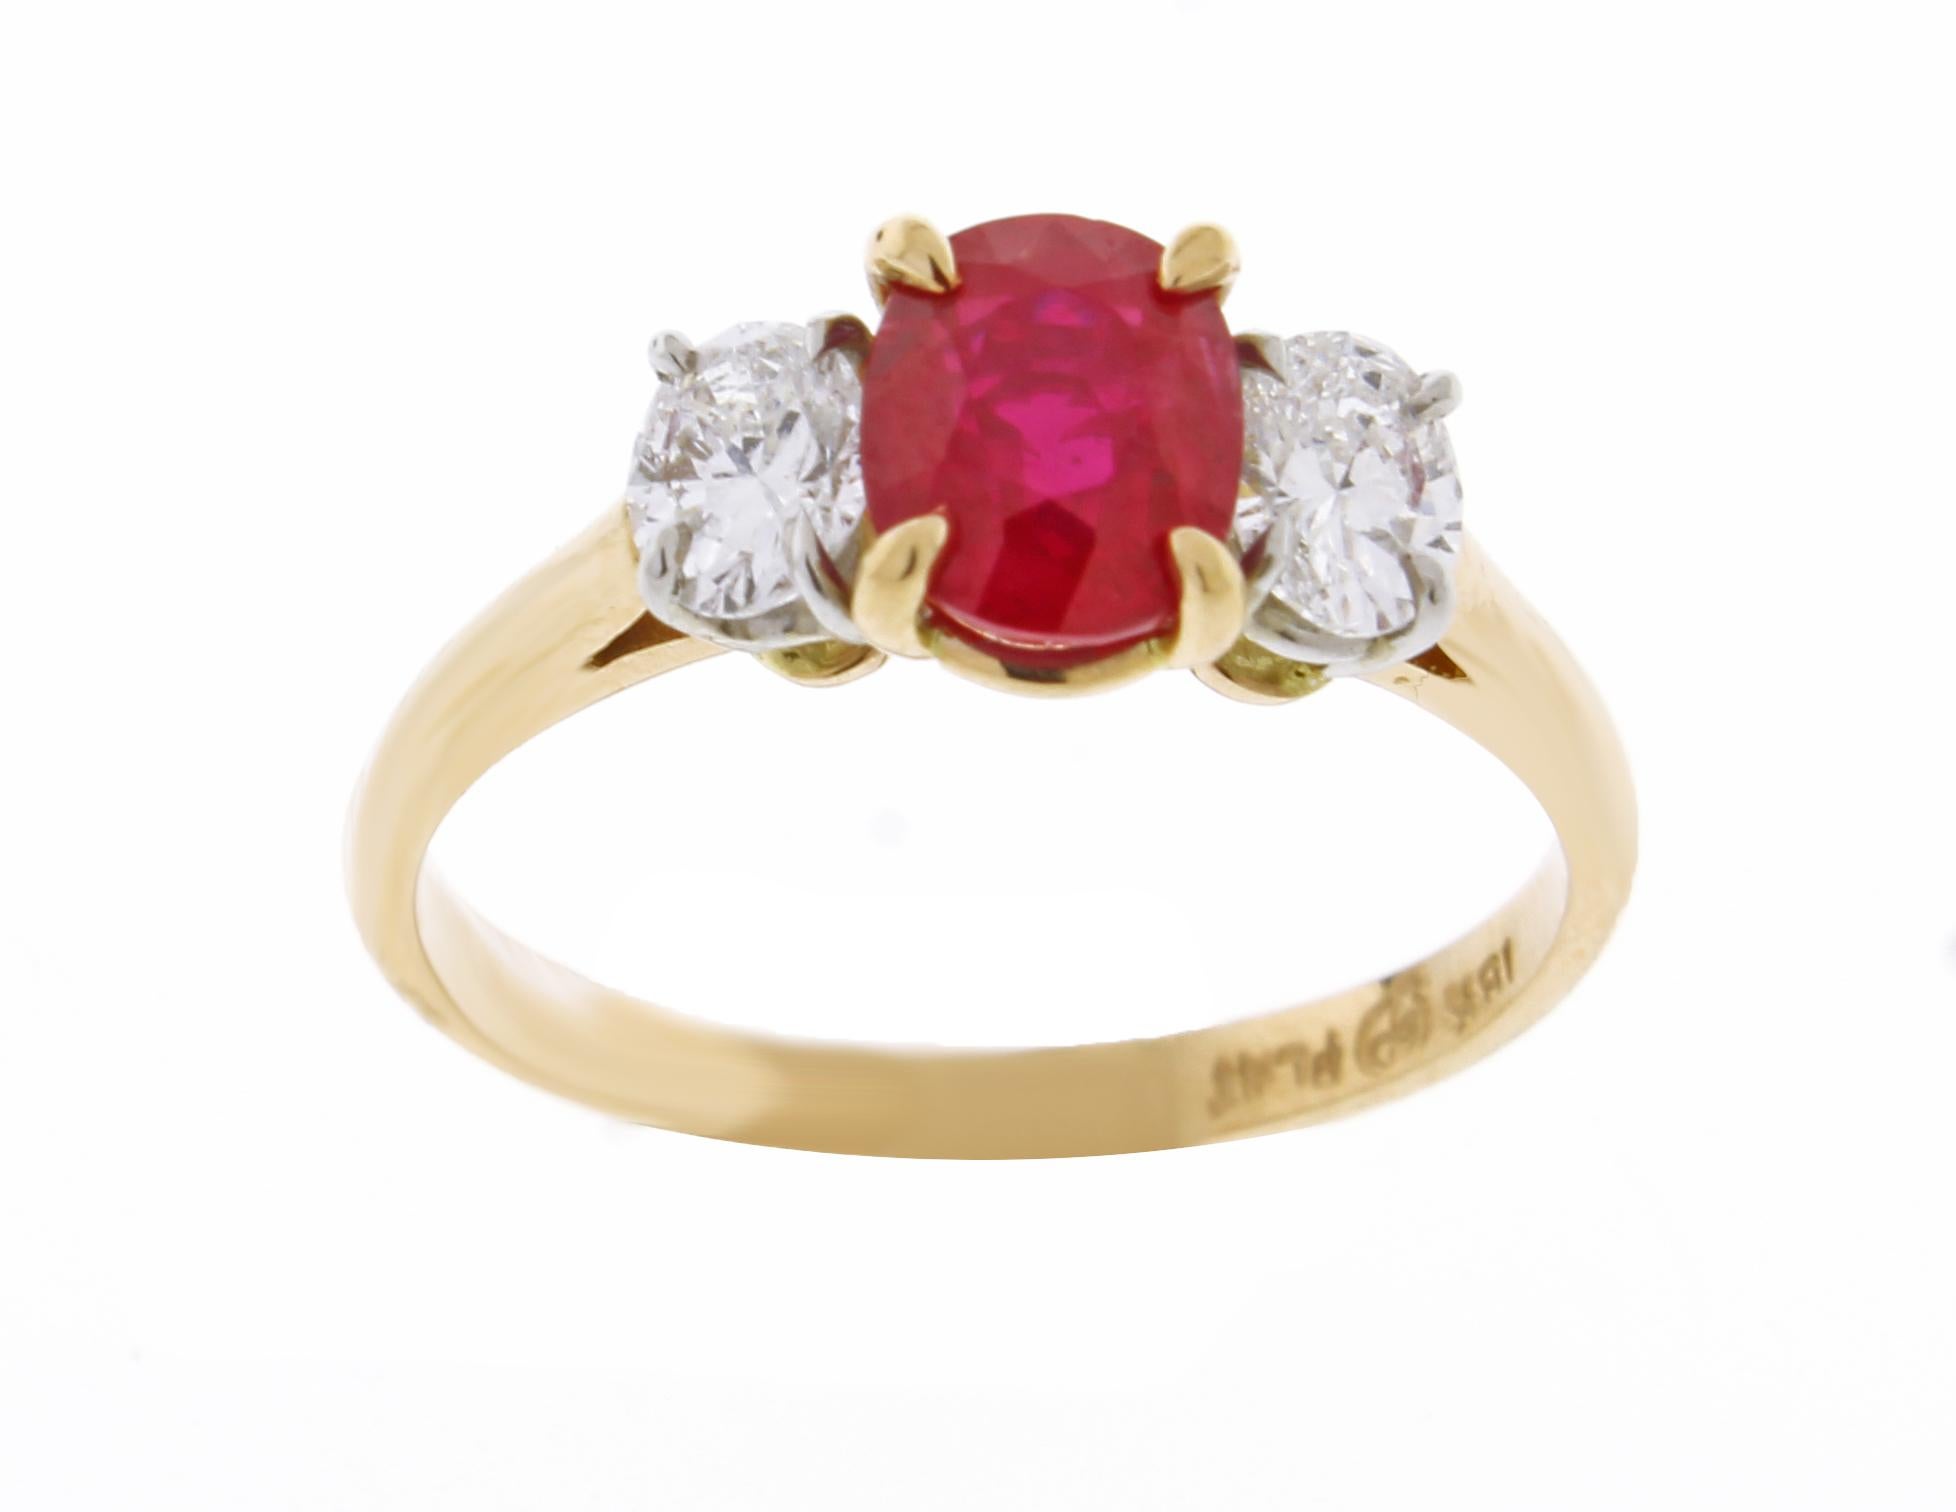 From Pampillonia jewelers an oval Burma ruby and diamond hand made ring.
♦ Designer :Pampillonia
♦ Metal: 18 karat and platinum
♦  Oval ruby =1.08 carats A.G.L certified Burma non heated
♦ 2  Oval diamonds=.45 carats F color VS clarity
♦ Circa